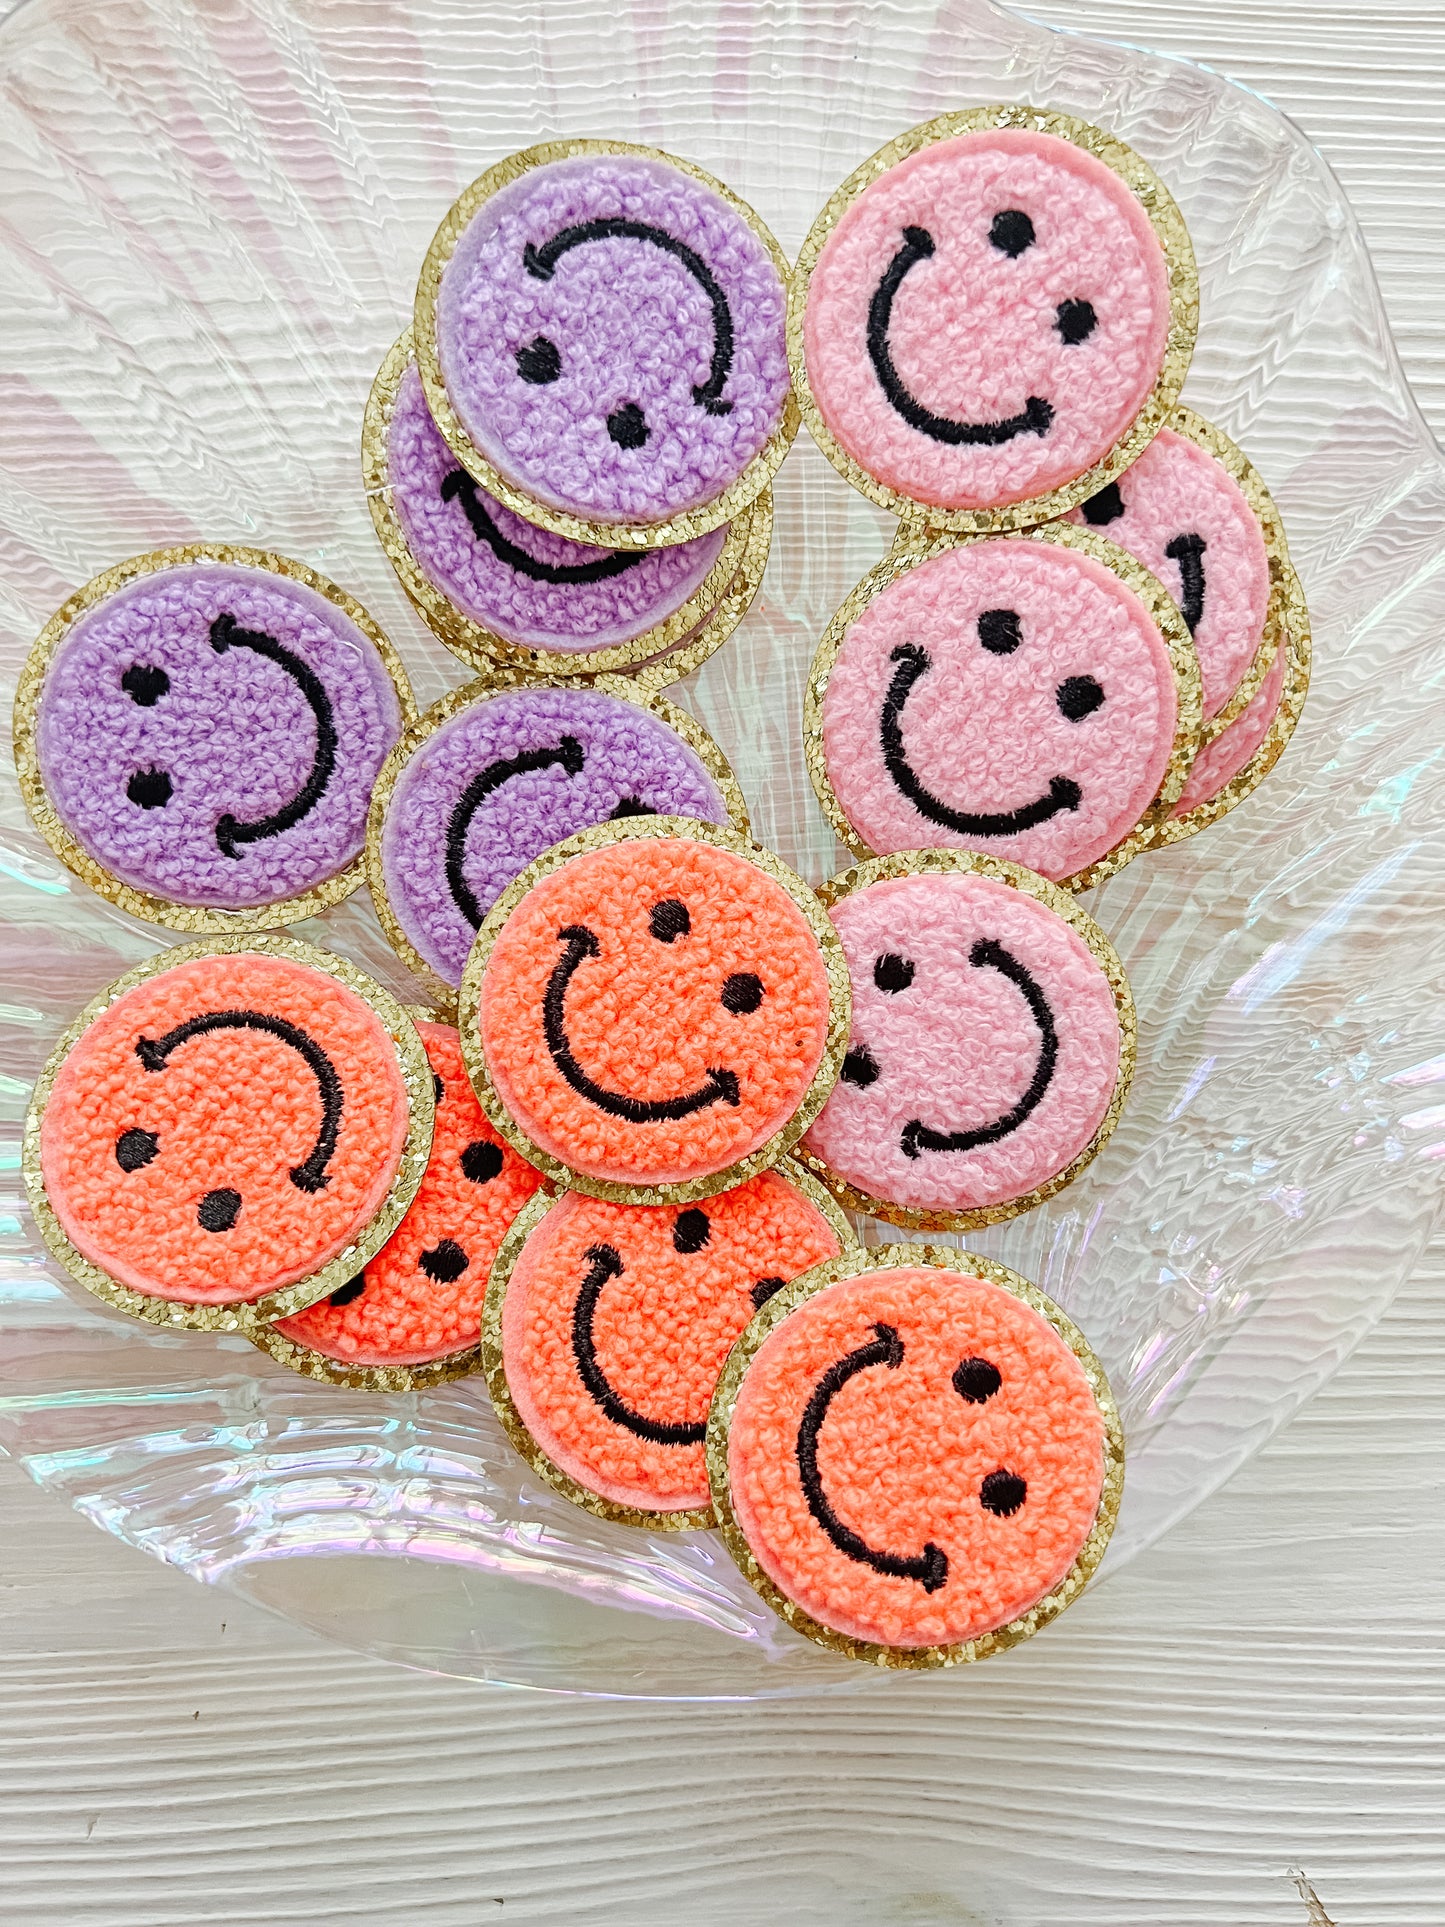 Smiley patches